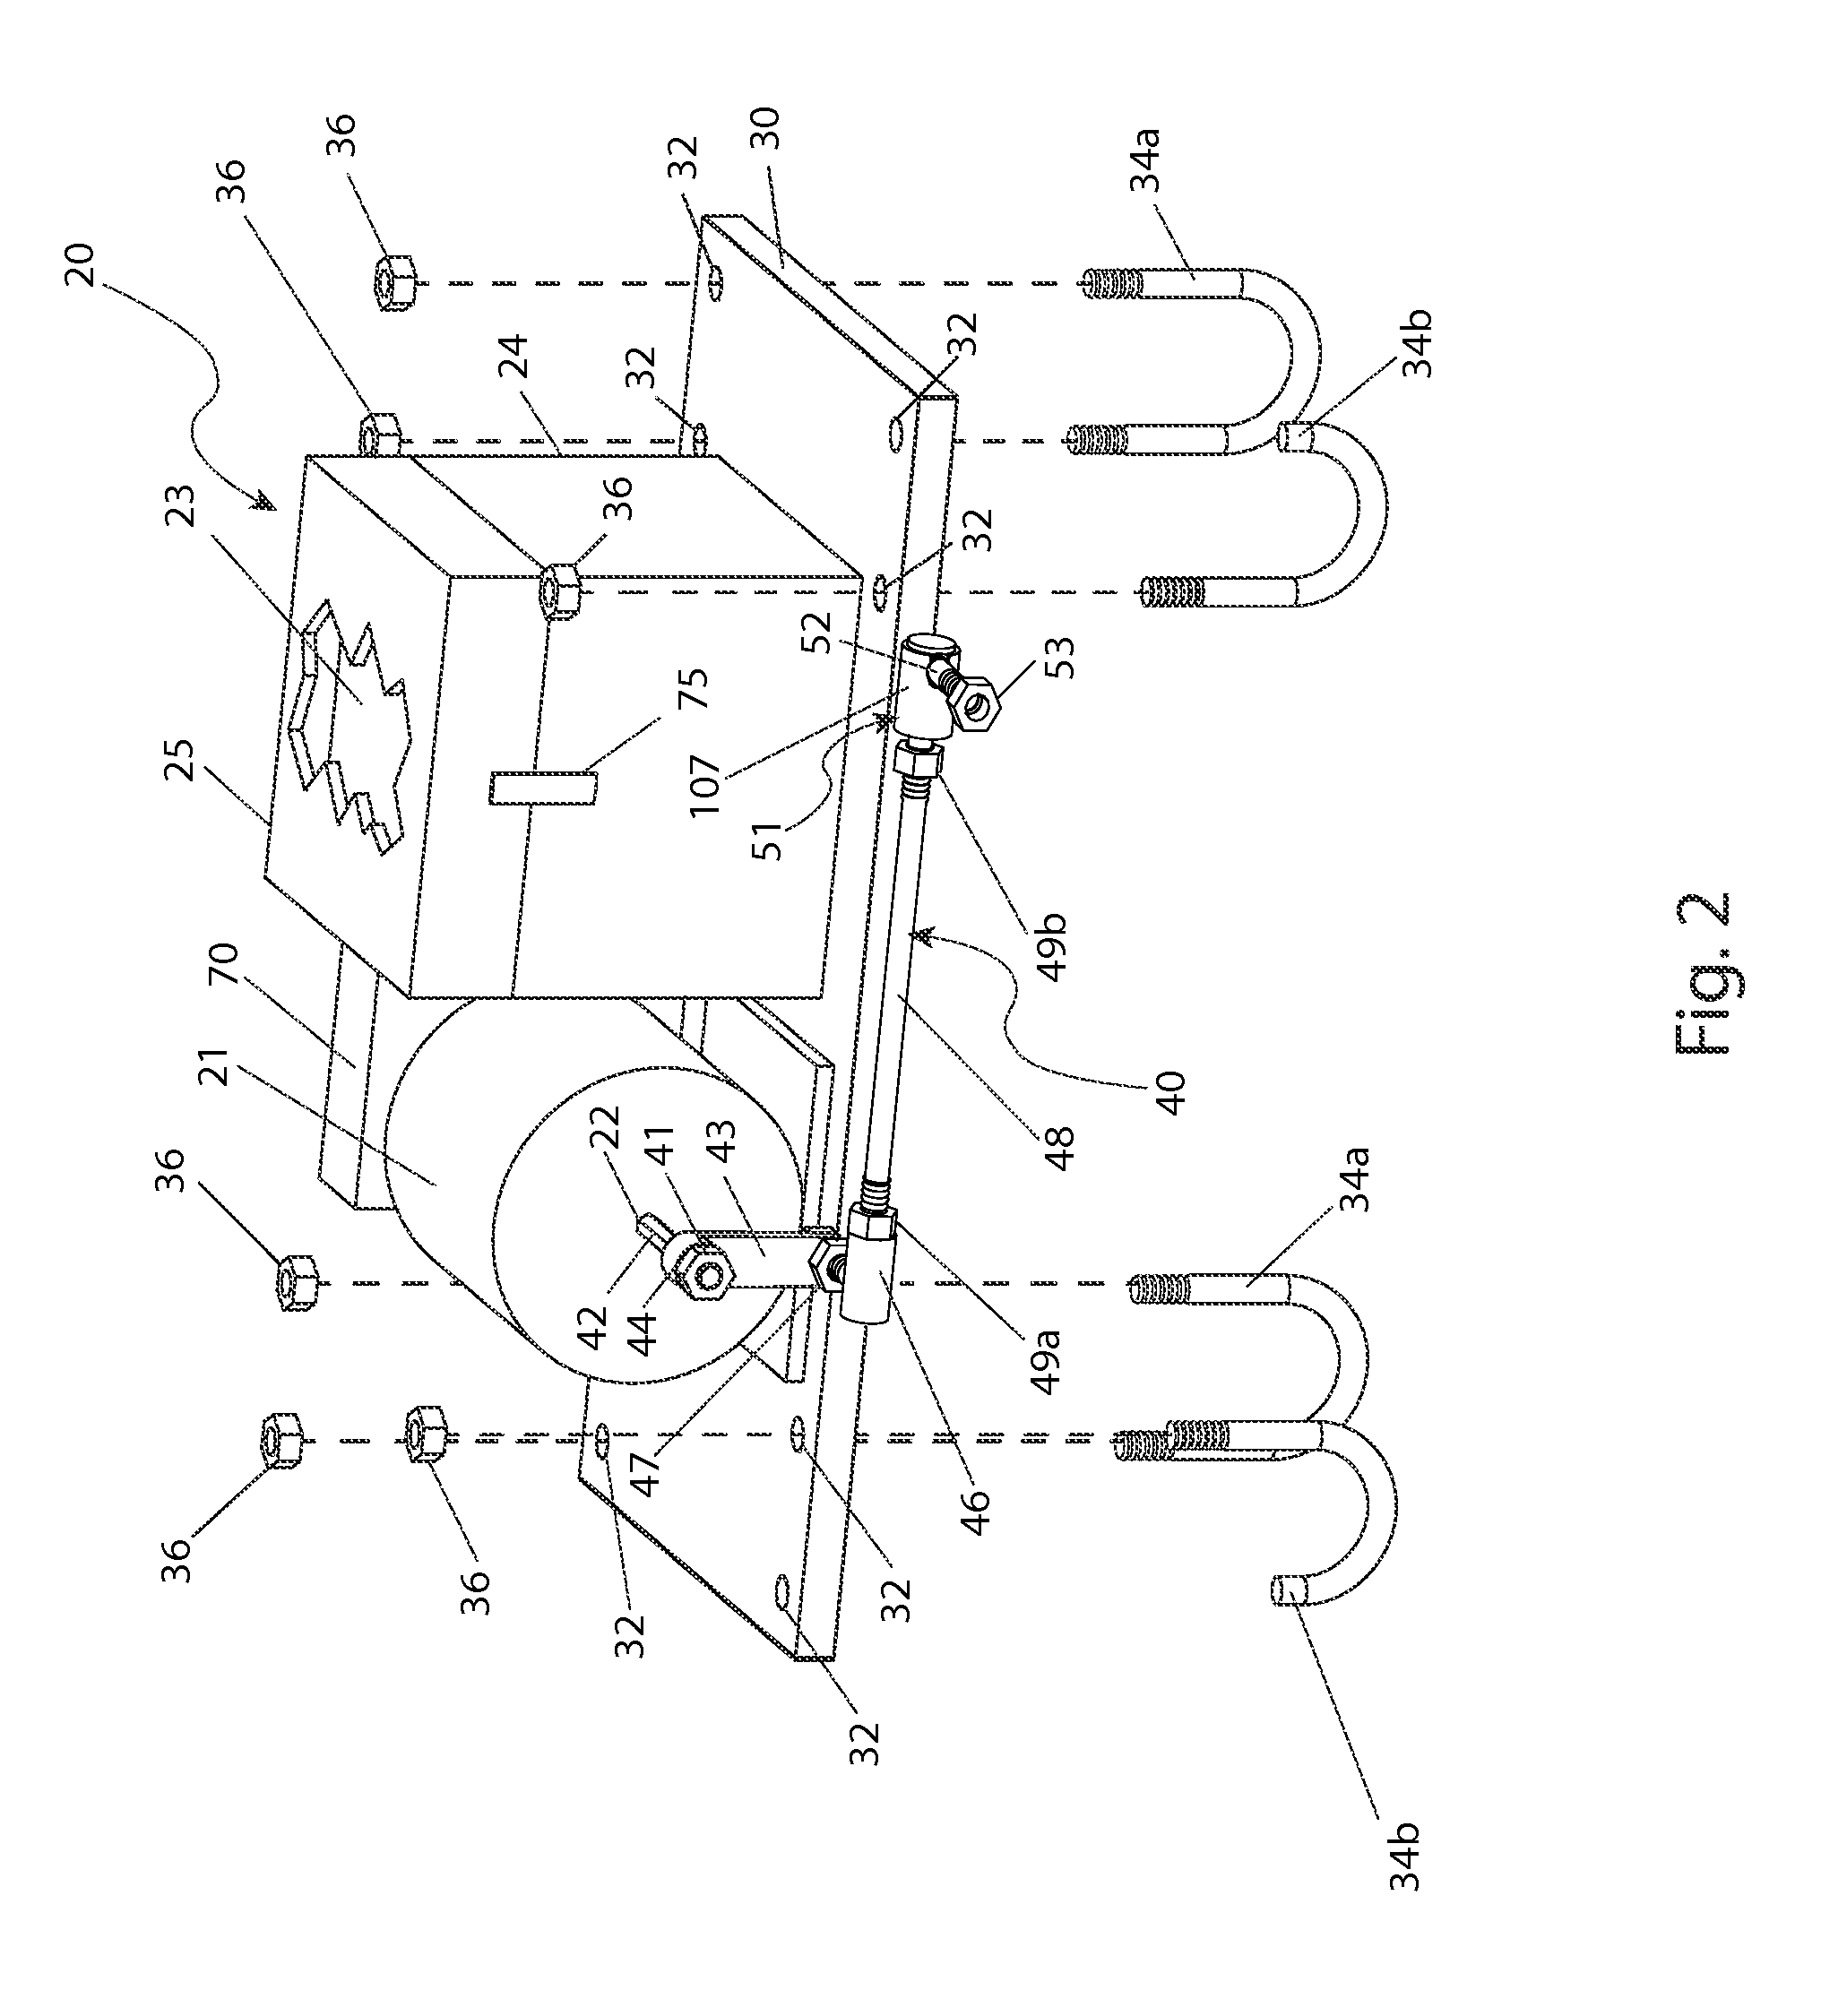 Reciprocating motion apparatus for a stroller